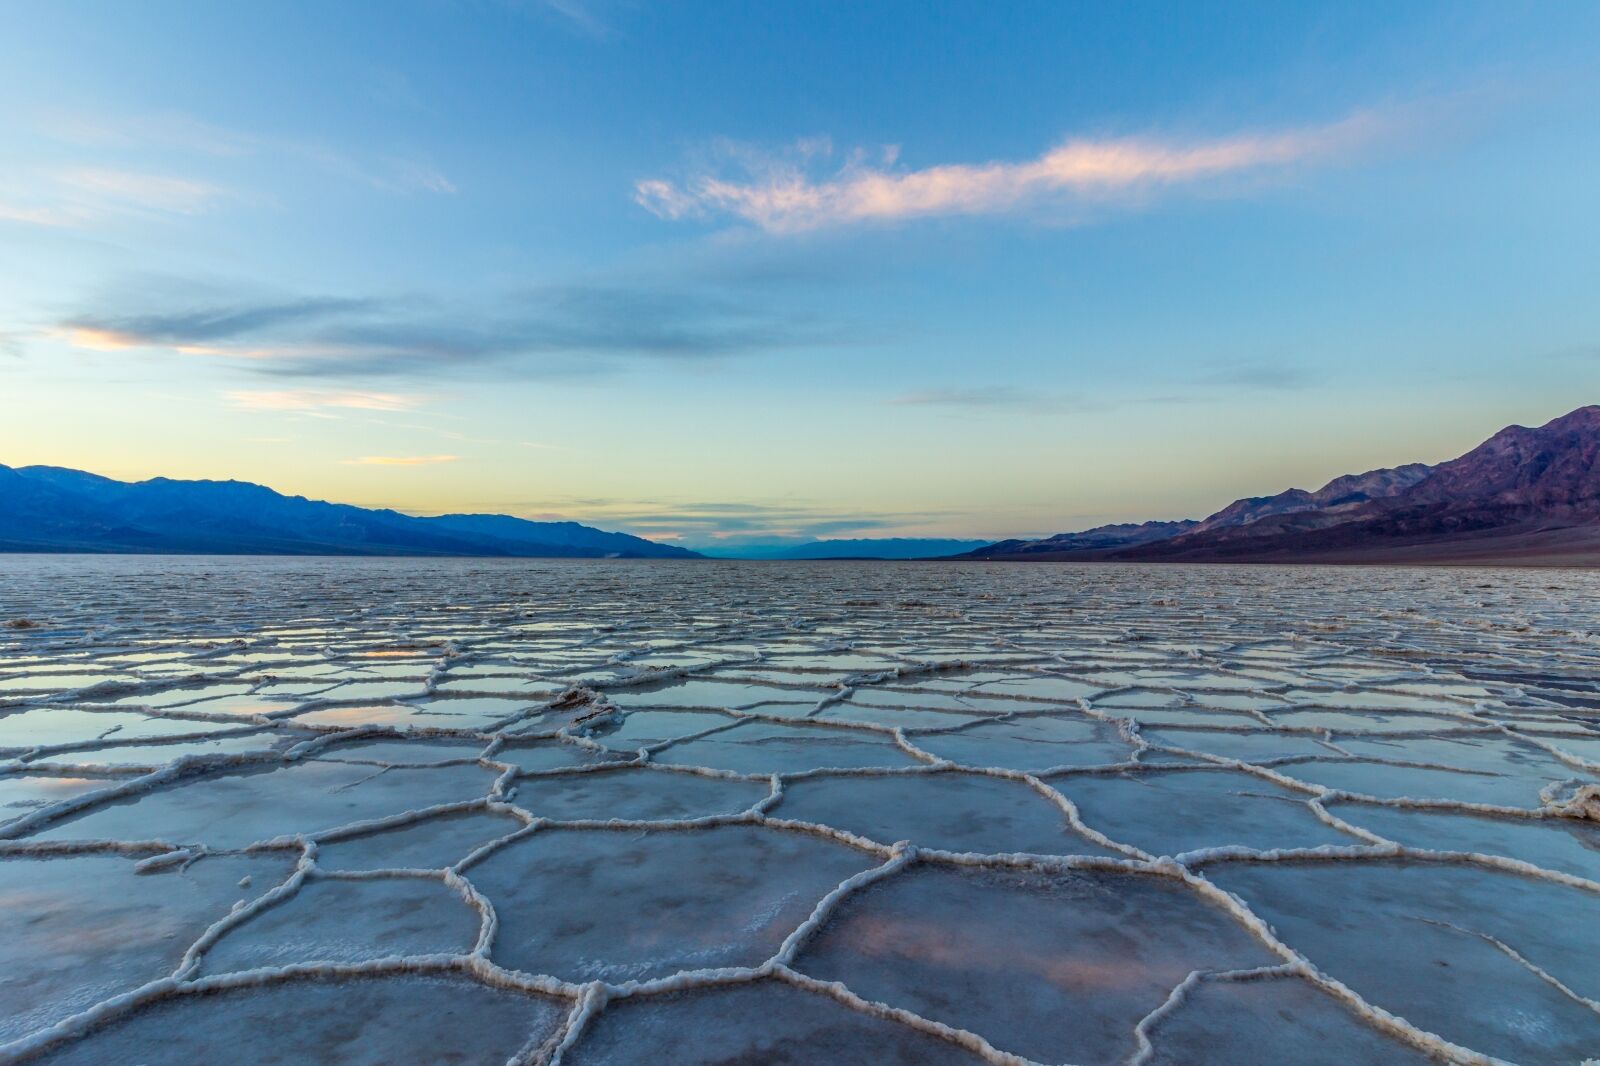 Salt flats in Death Valley are one of the best things to do in Las Vegas